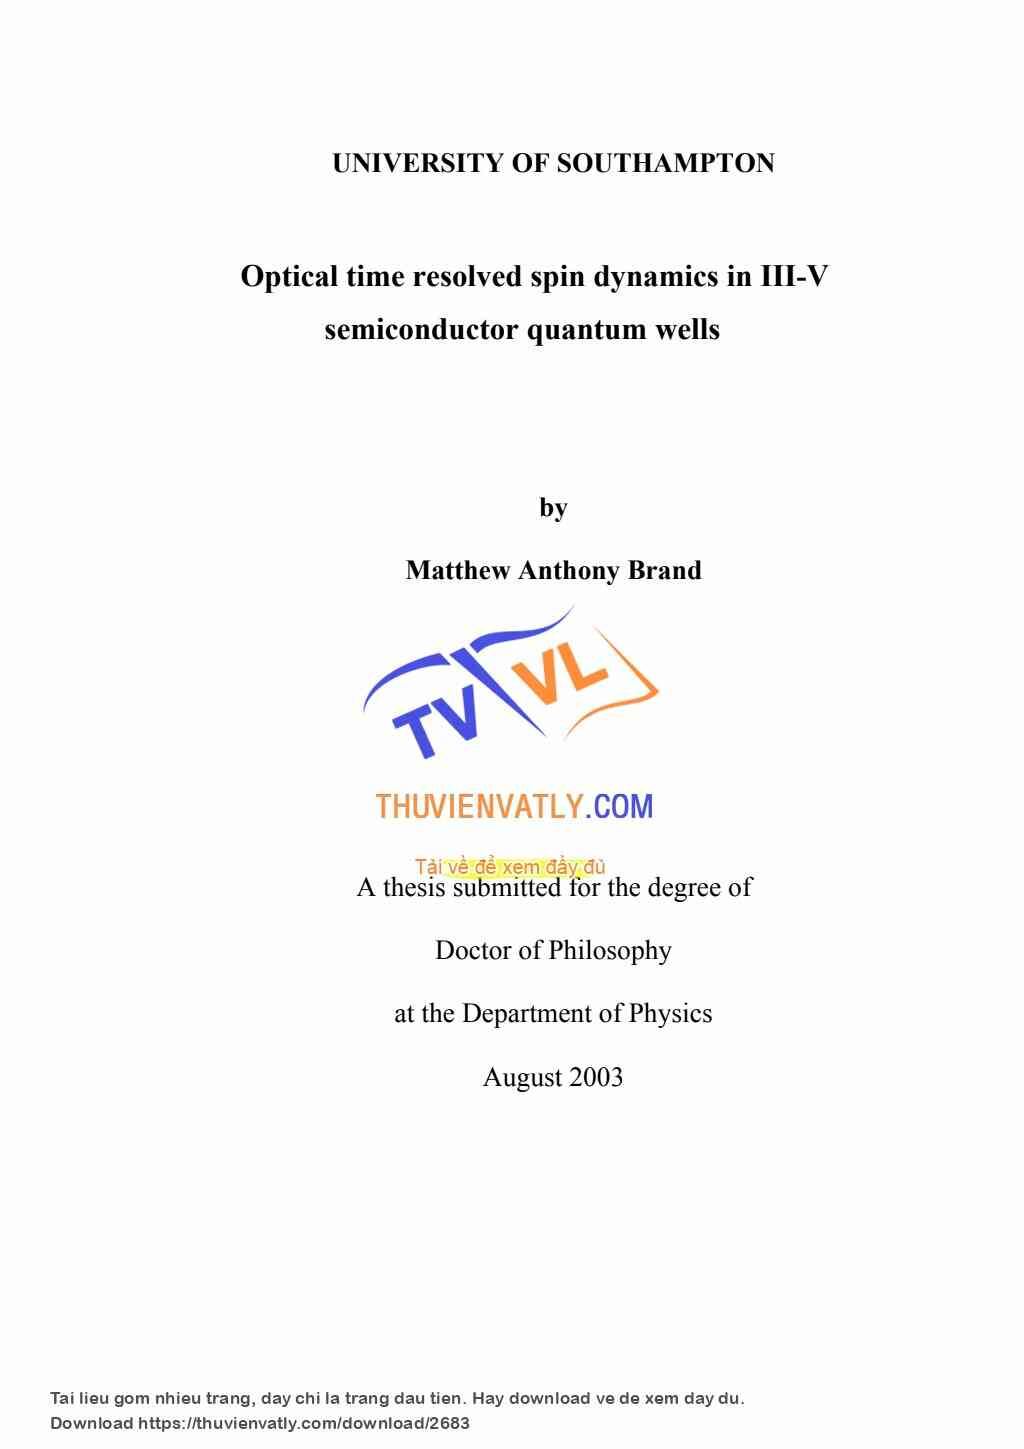 Ph.D Thesis: Optical time resolved spin dynamics in III-V semiconductor quantum wells